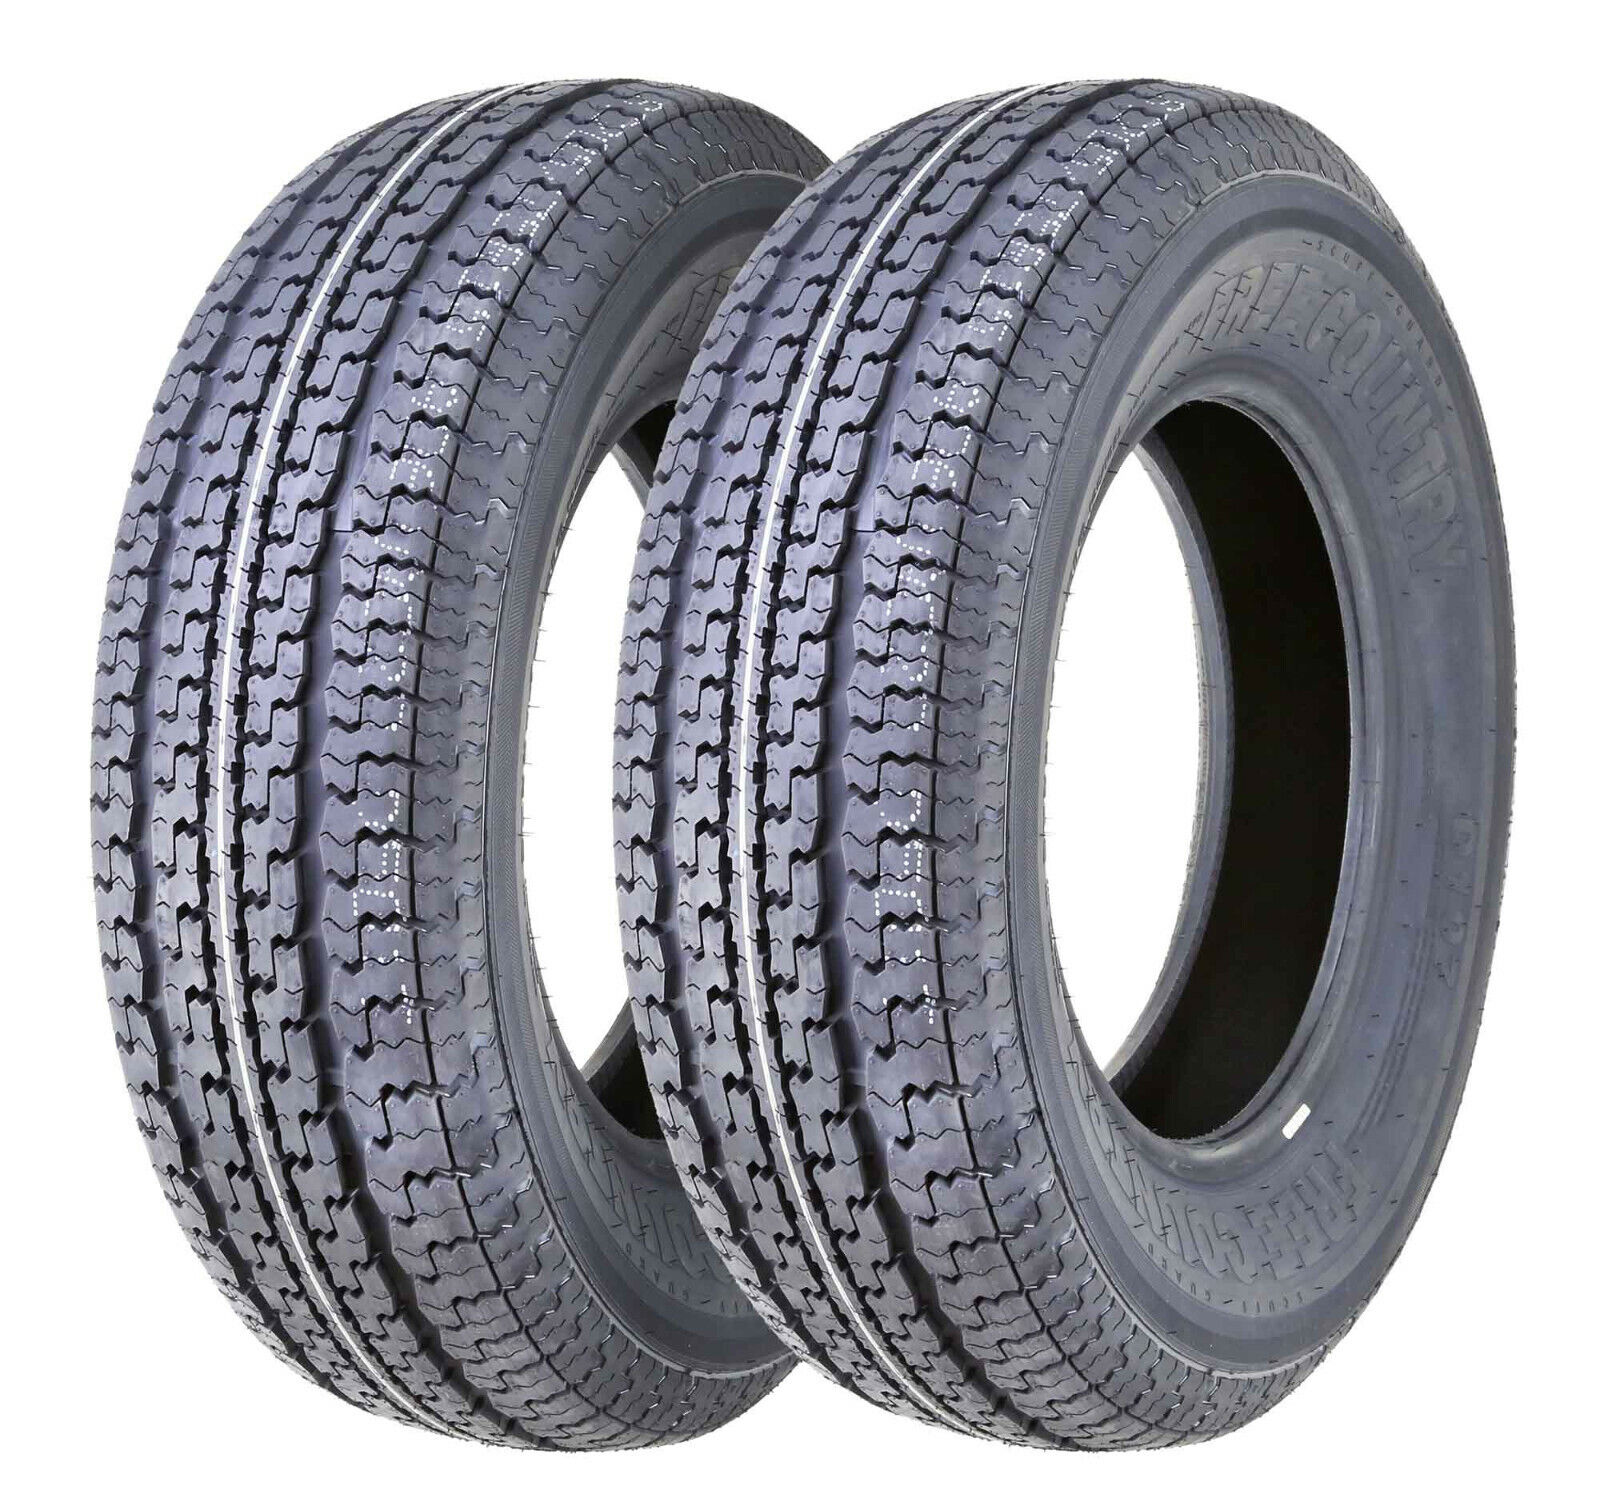 2 ST175/80R13 FREE COUNTRY Trailer Tires  Radial 8 Ply LR M w/Scuff Guard